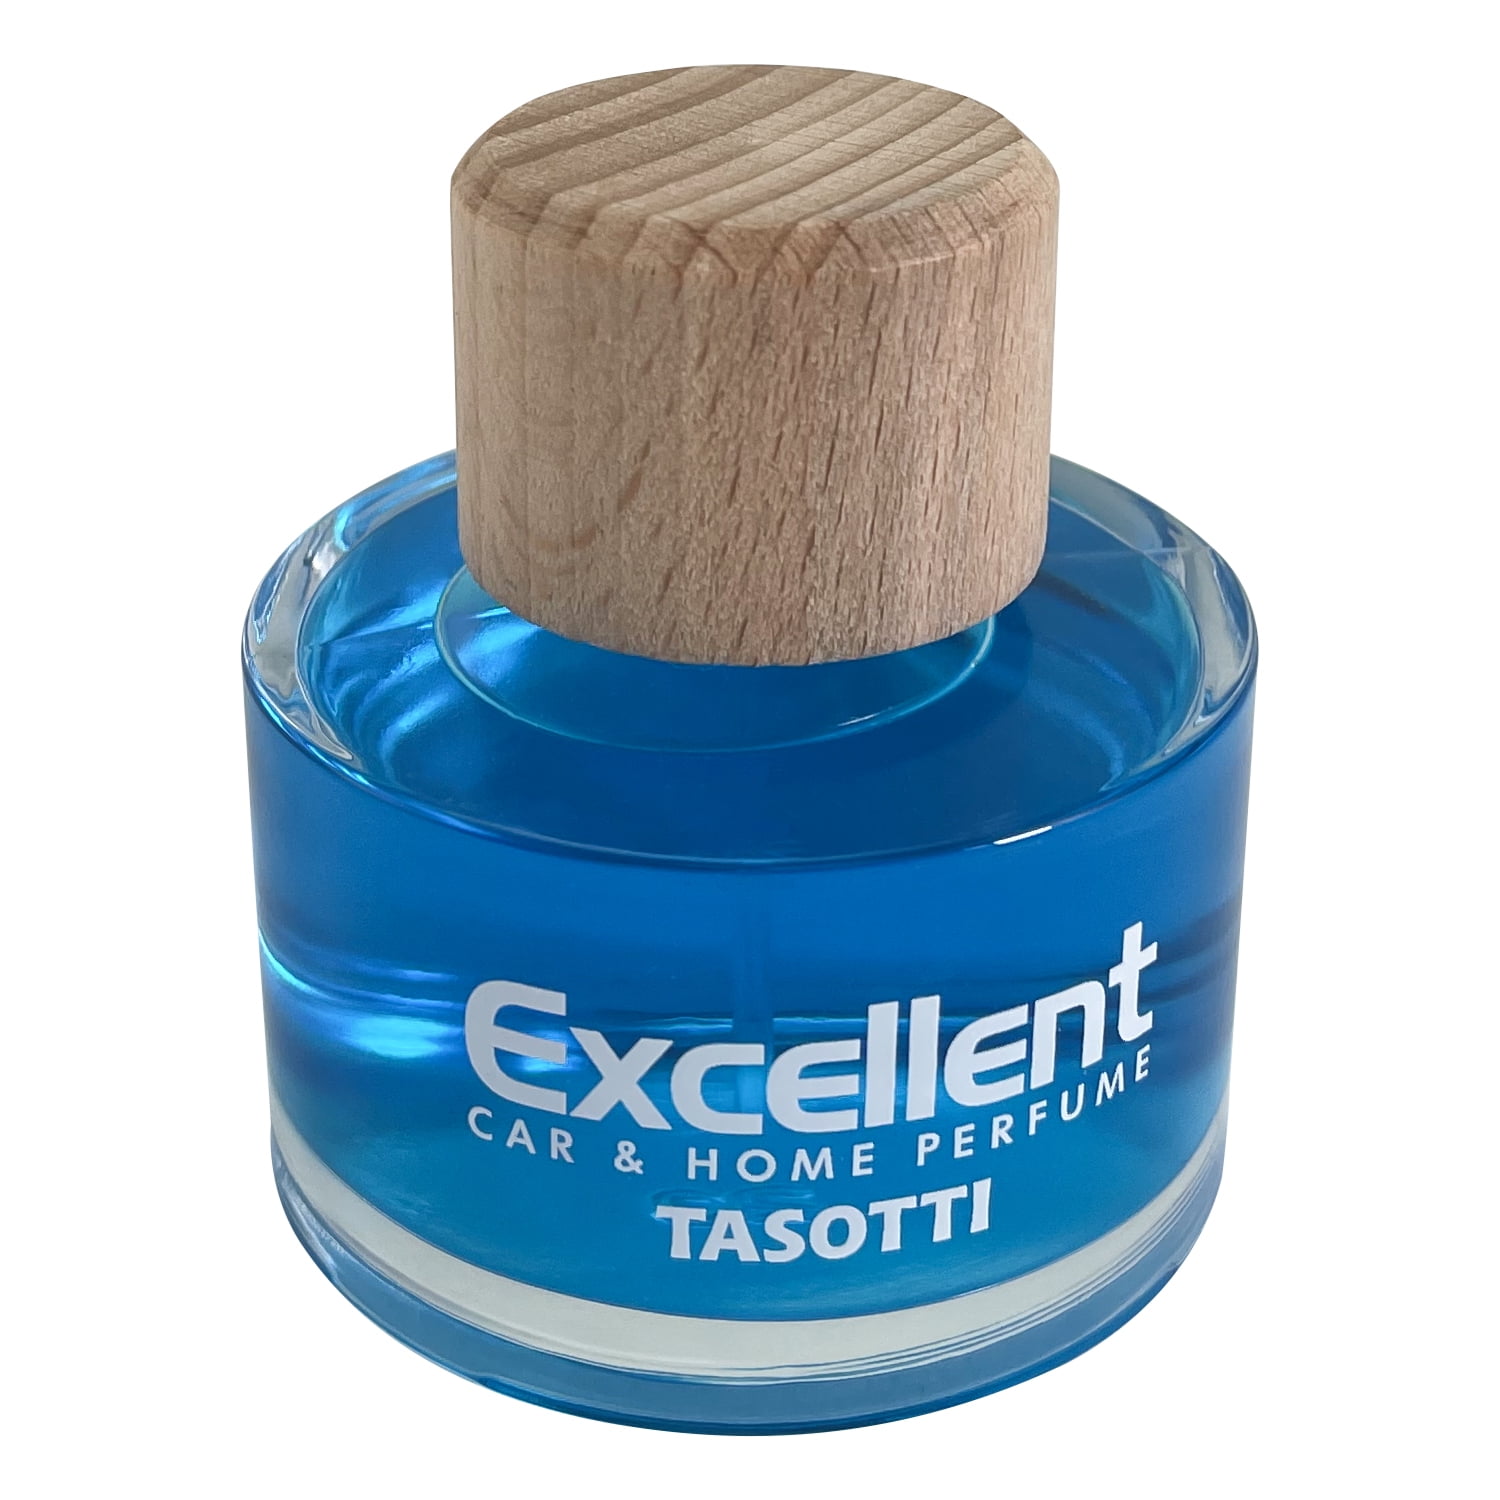 Tasotti Excellent Car Perfume Air Freshener, Luxury Car Air fresheners and  Car Odor Eliminator, Long Lasting Scent Up to 75 Days, Ice Aqua 